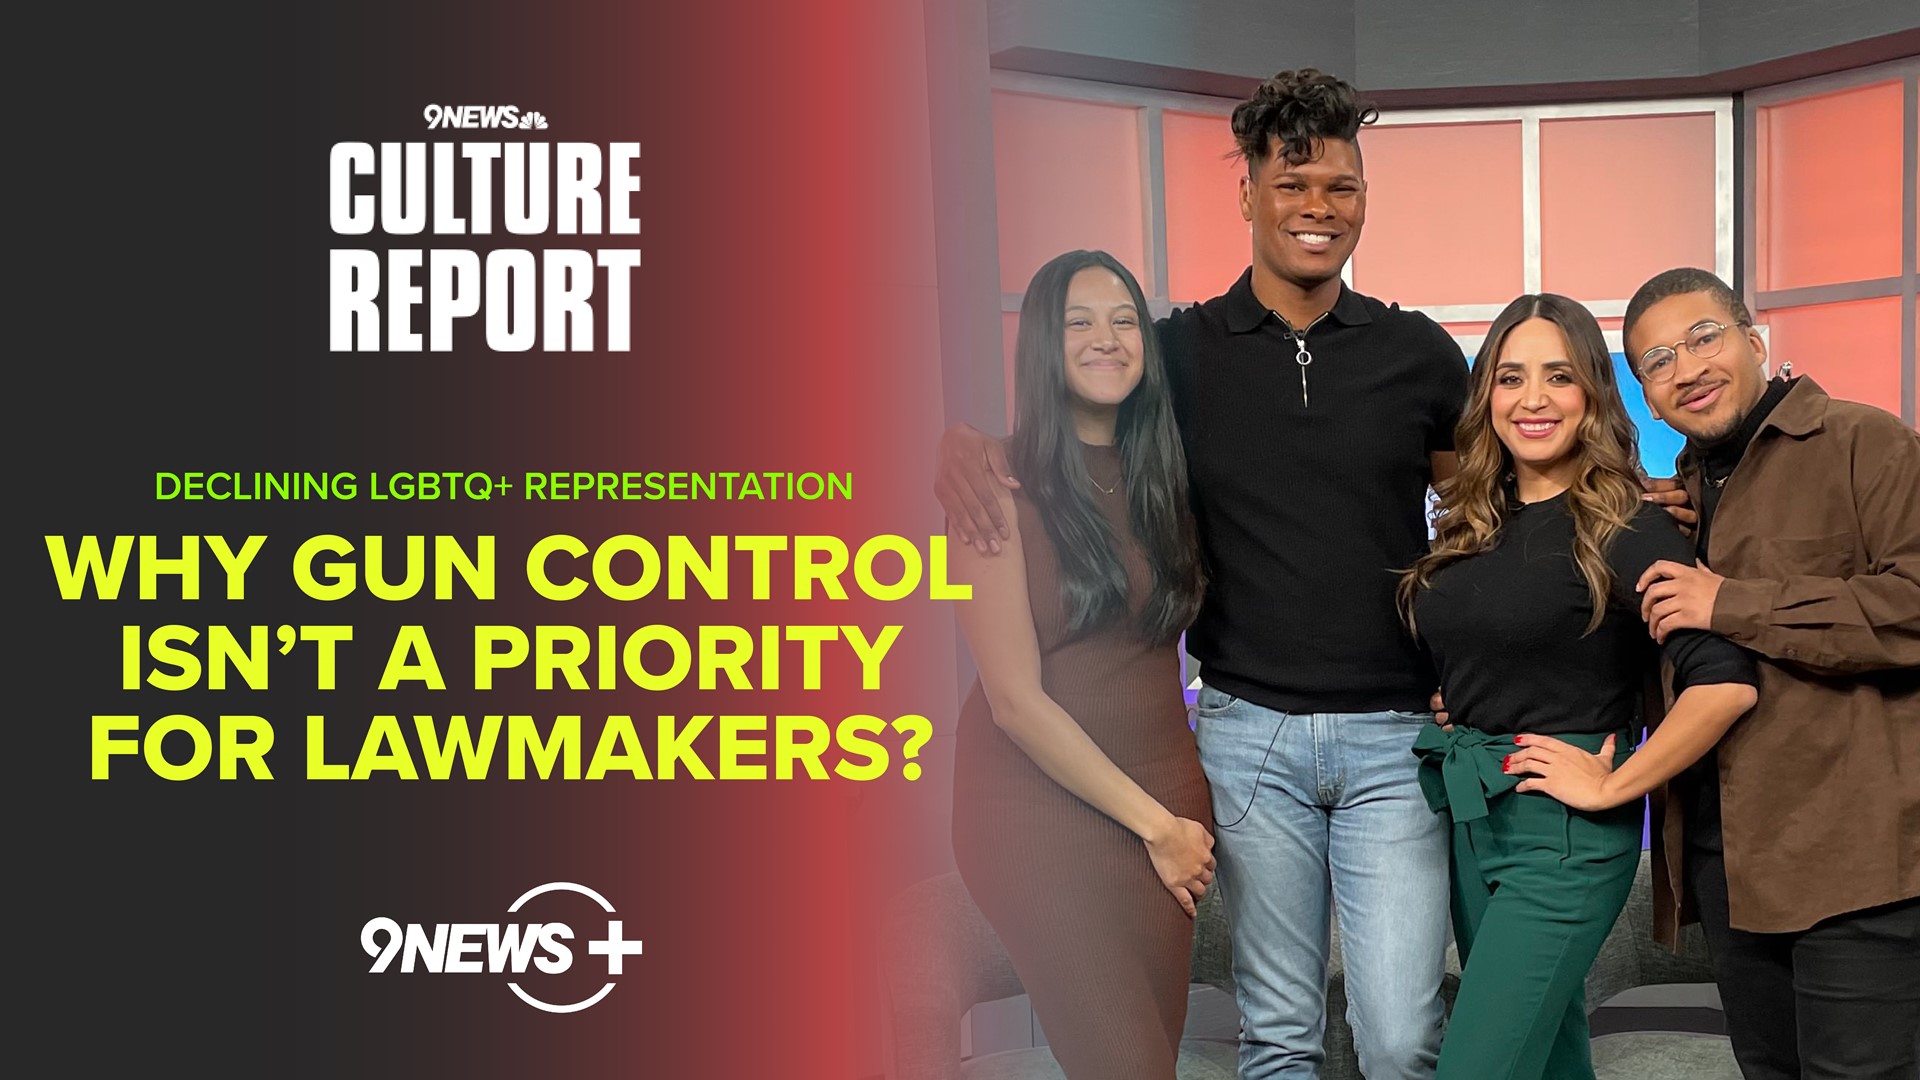 This week we dive into why some legislation is fast-tracked vs why new gun control laws aren't prioritized, a new report shows a decline in LGBTQ+ representation.